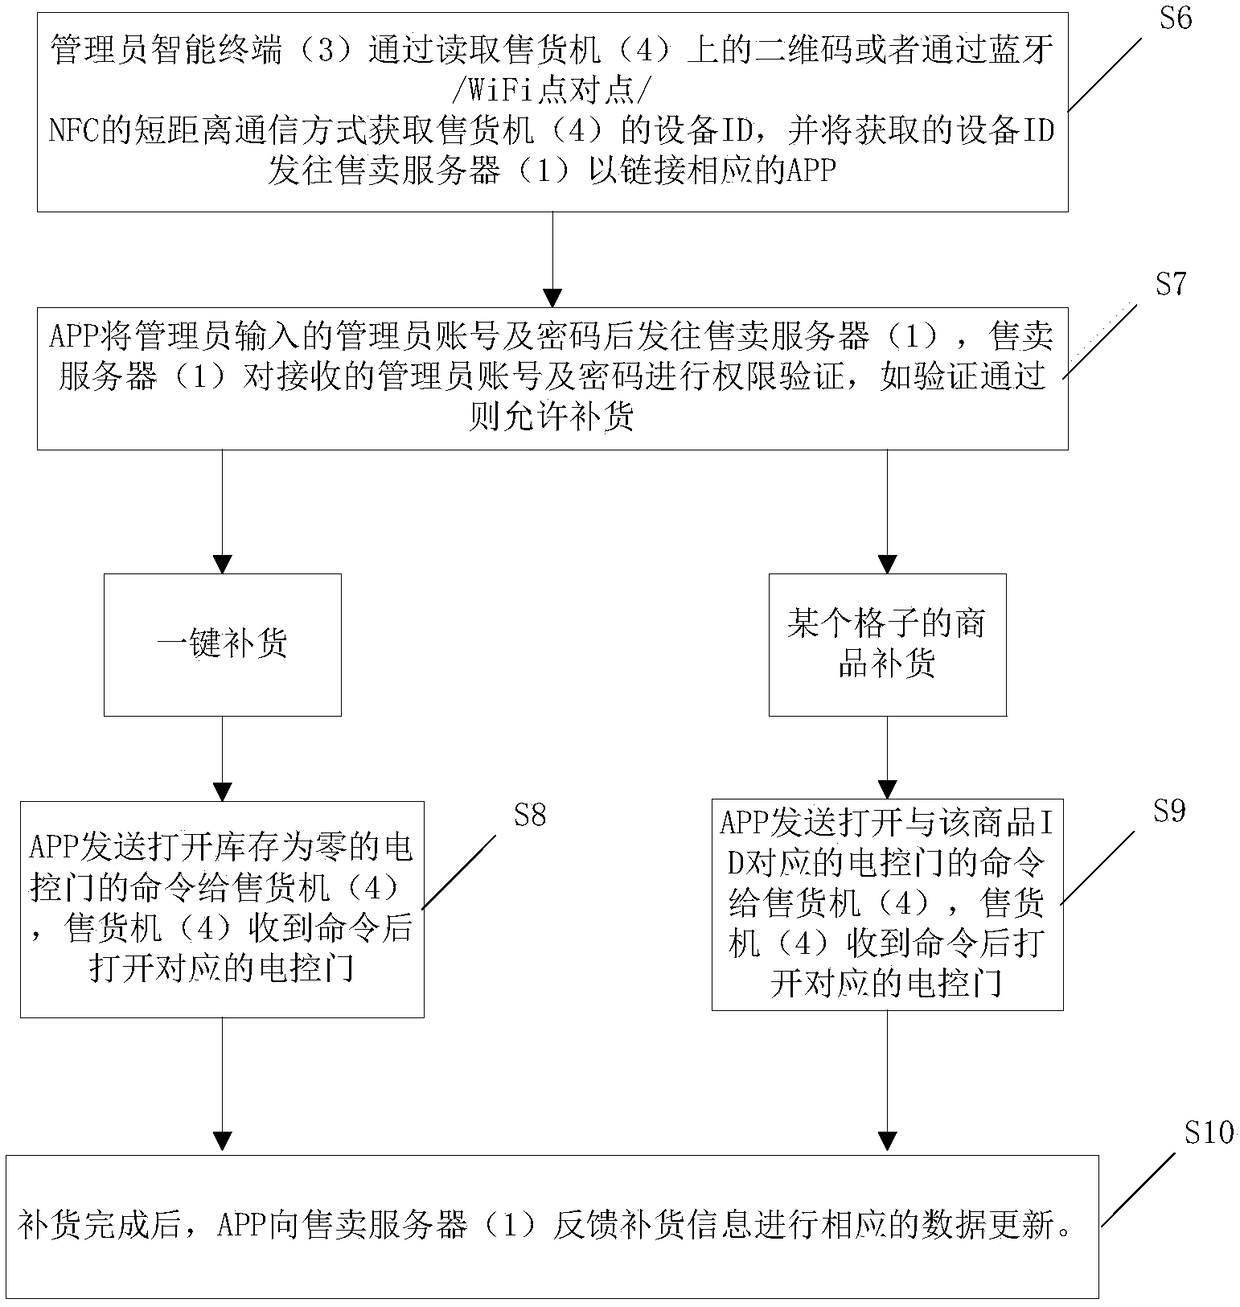 Data processing method of vending machine and hotel guest room shopping system